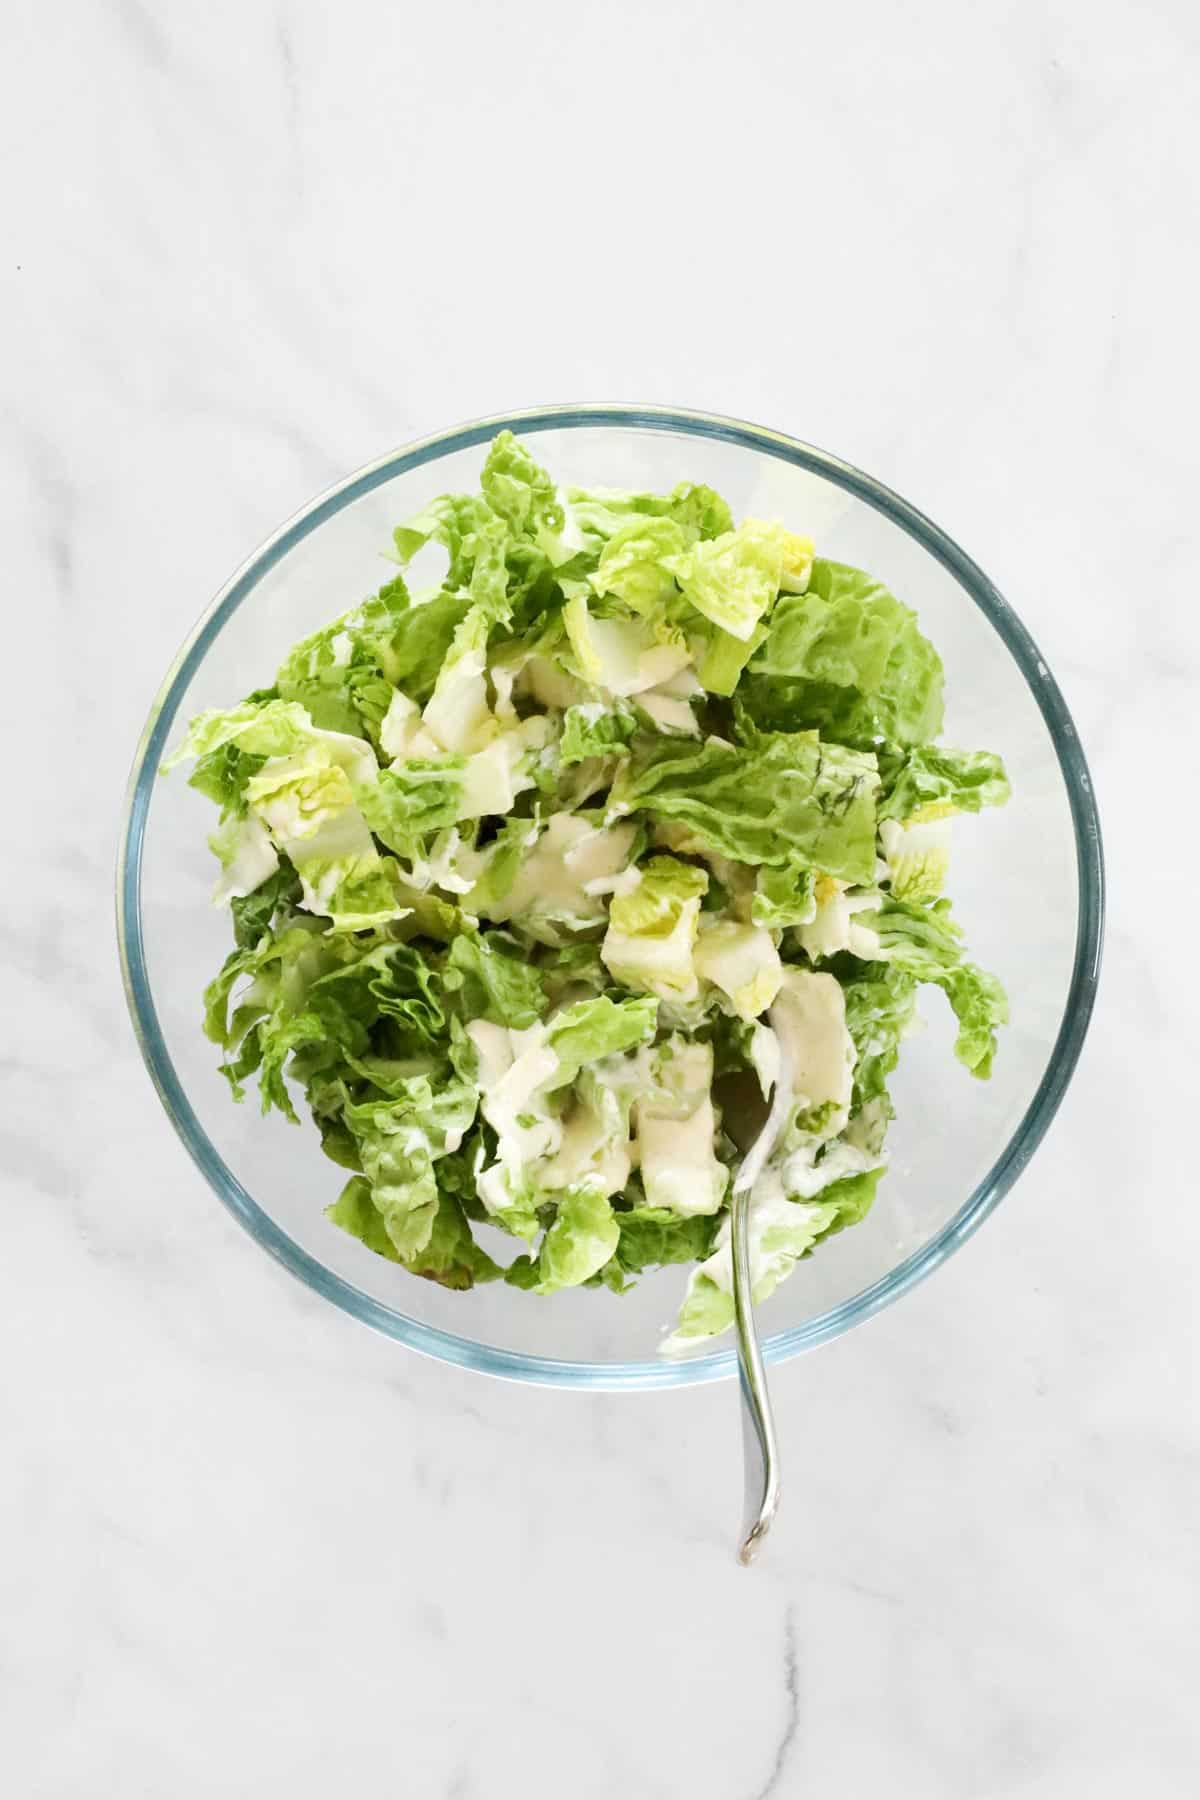 A creamy dressing tossed through chopped cos lettuce.